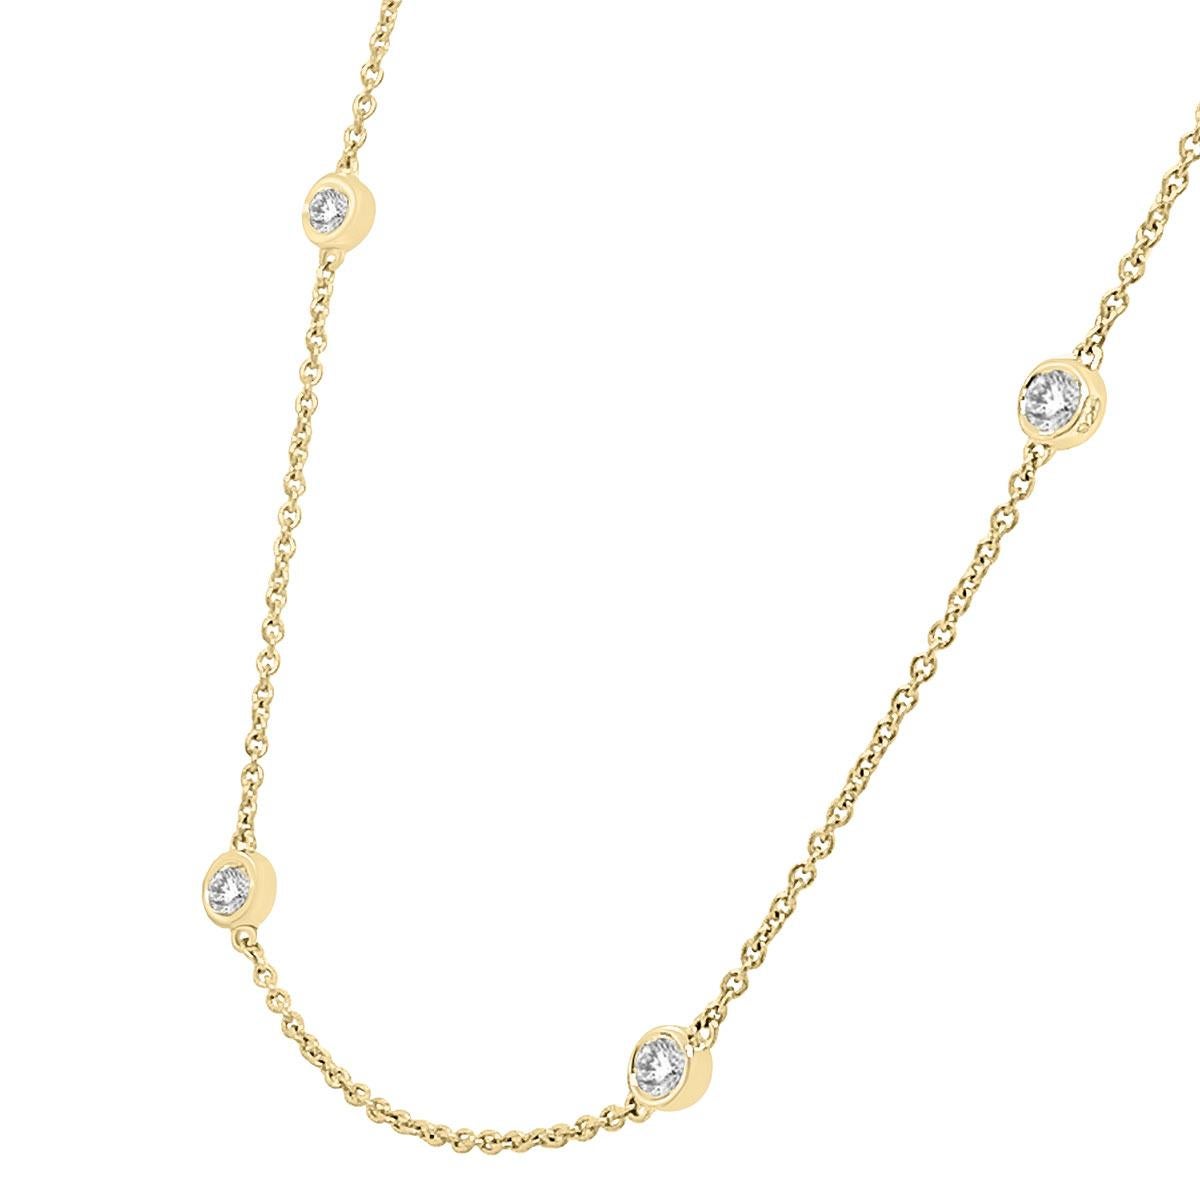 This classic necklace features six (6) perfectly matched brilliant round diamonds evenly spread. Experience the difference in person!

Product details: 

Center Gemstone Type: NATURAL DIAMOND
Center Gemstone Shape: ROUND
Metal: 18K Yellow Gold
Metal